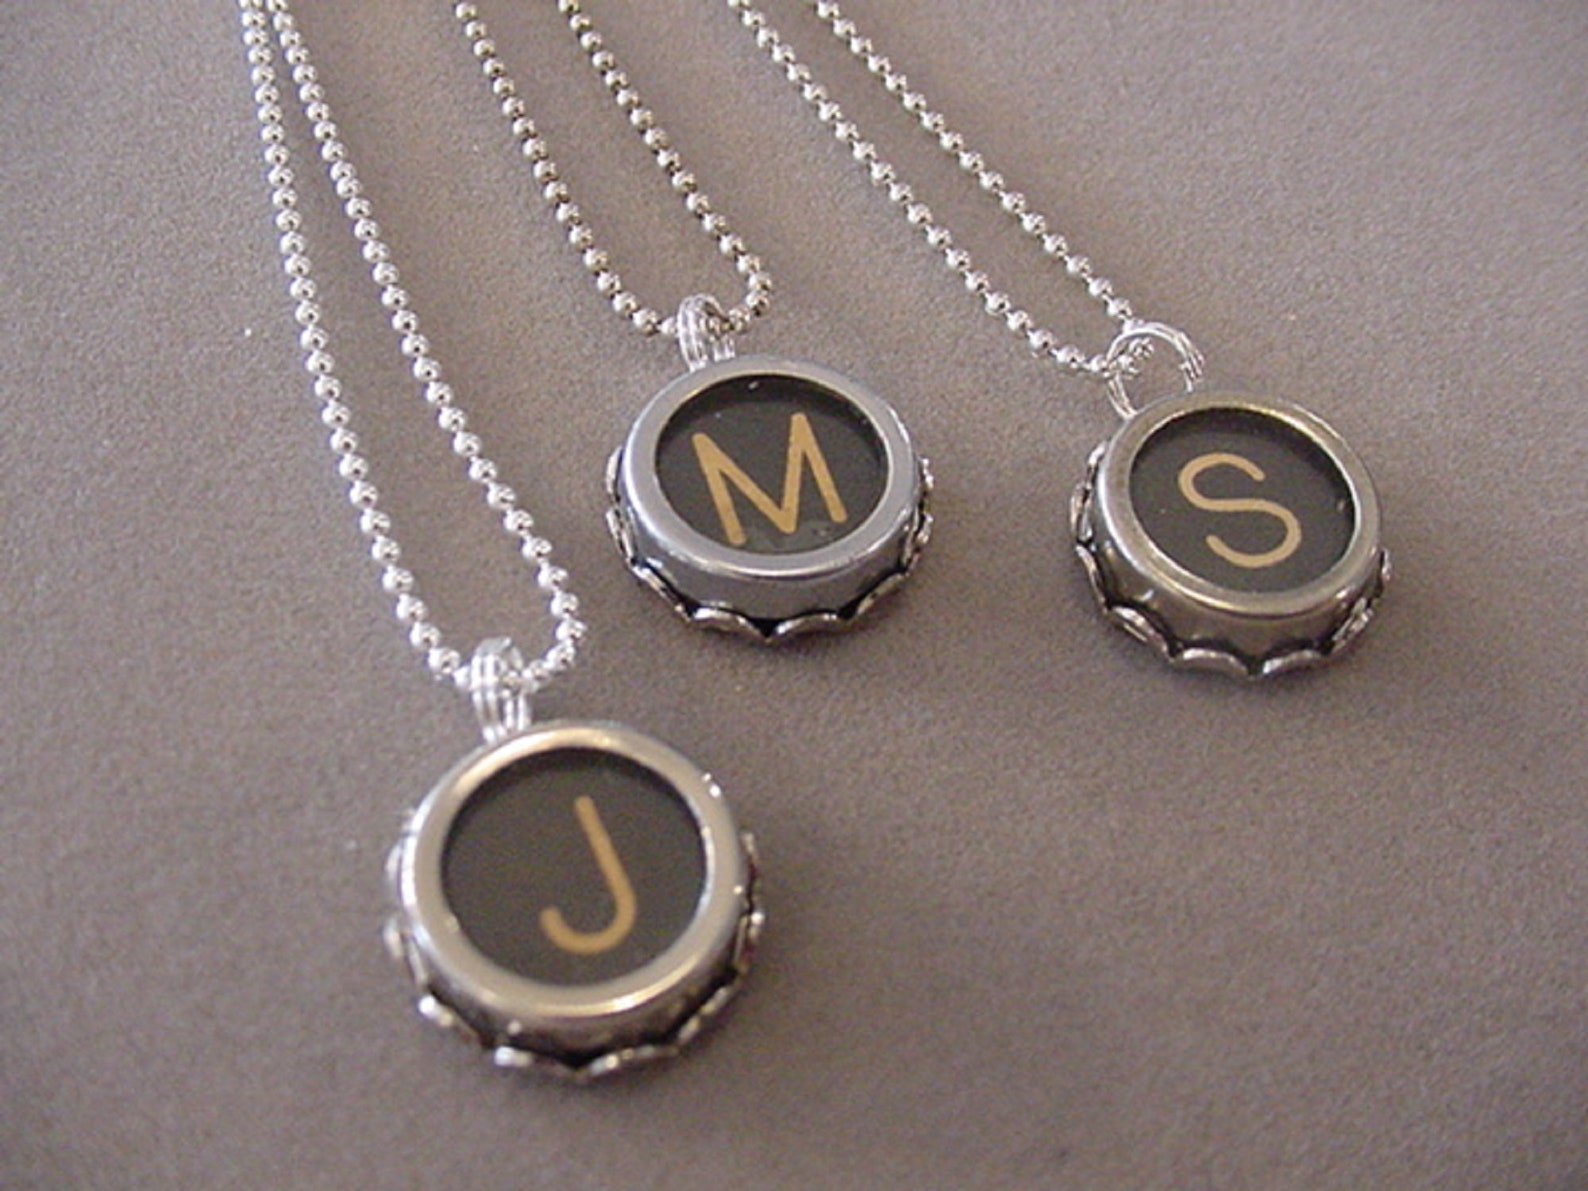 Black Typewriter key Necklace Initial Necklace you choose Initial